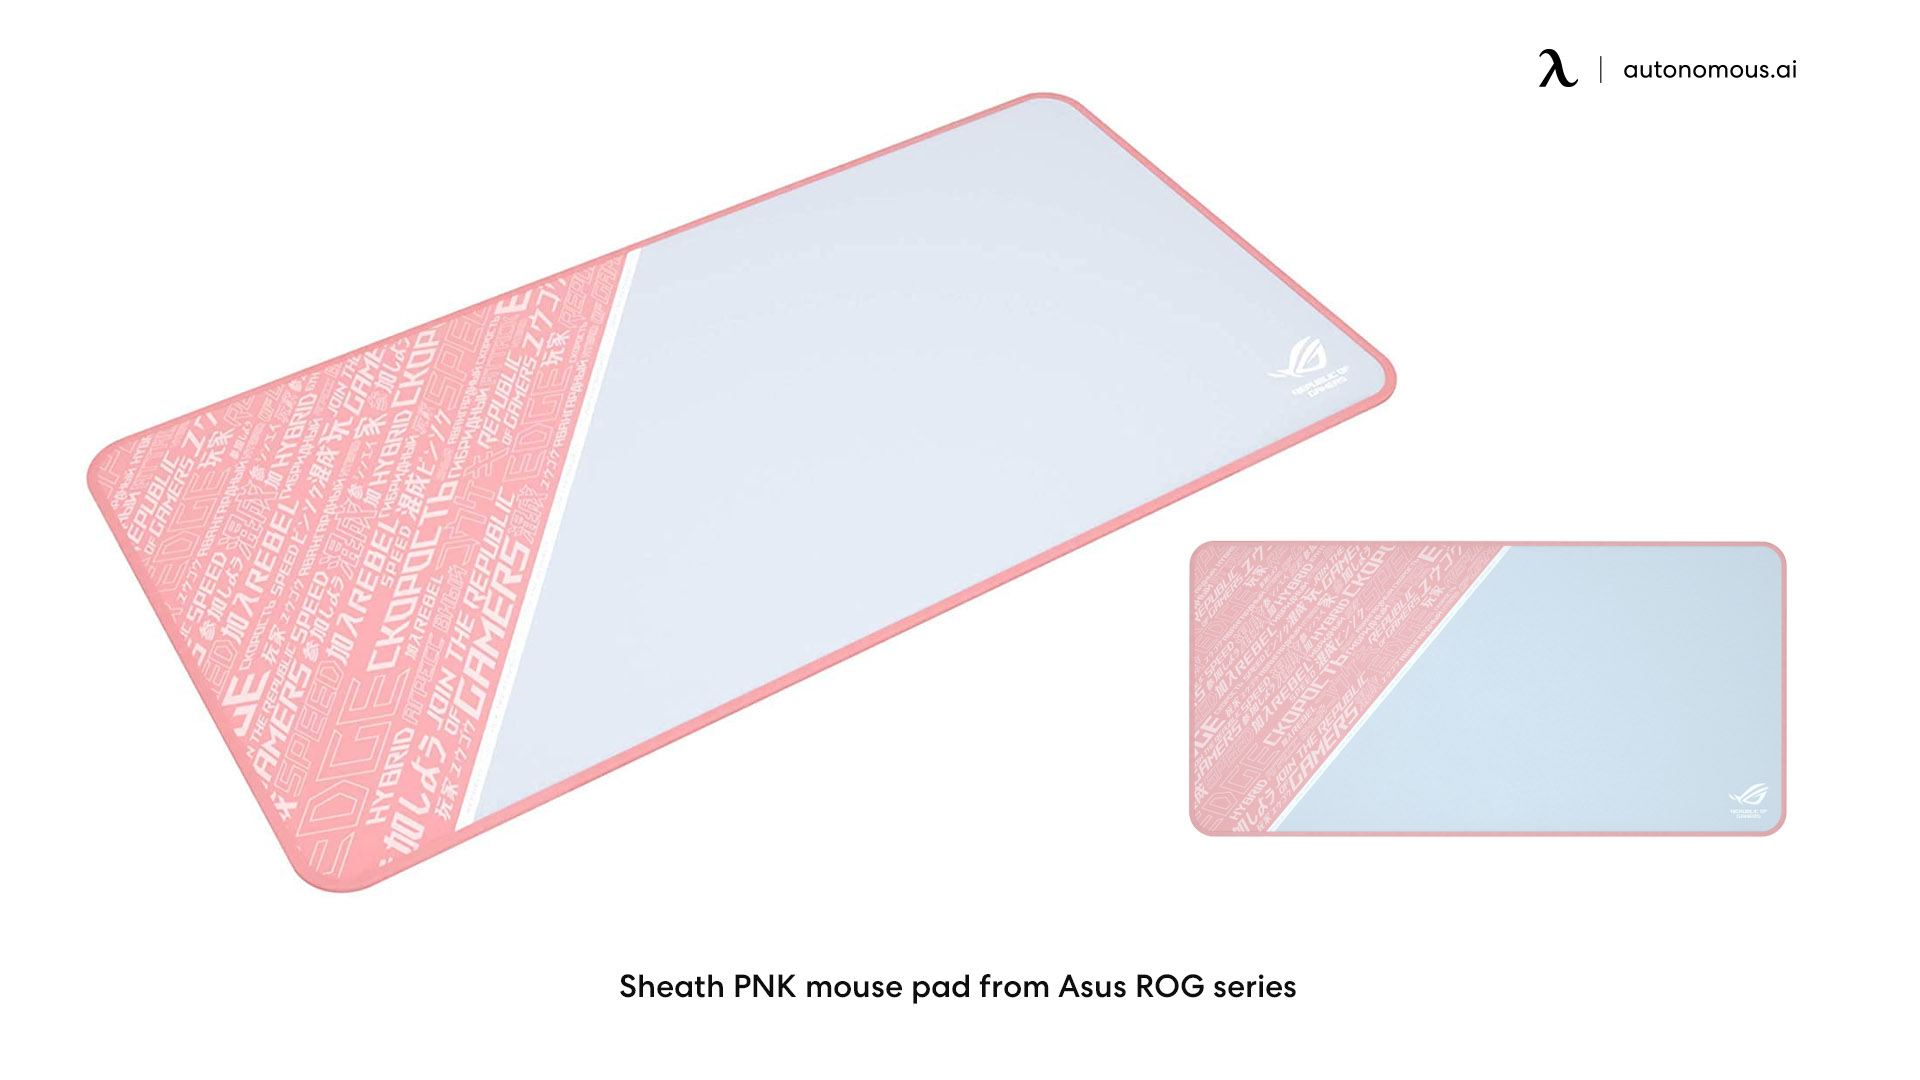 Sheath PNK mouse pad from Asus ROG series